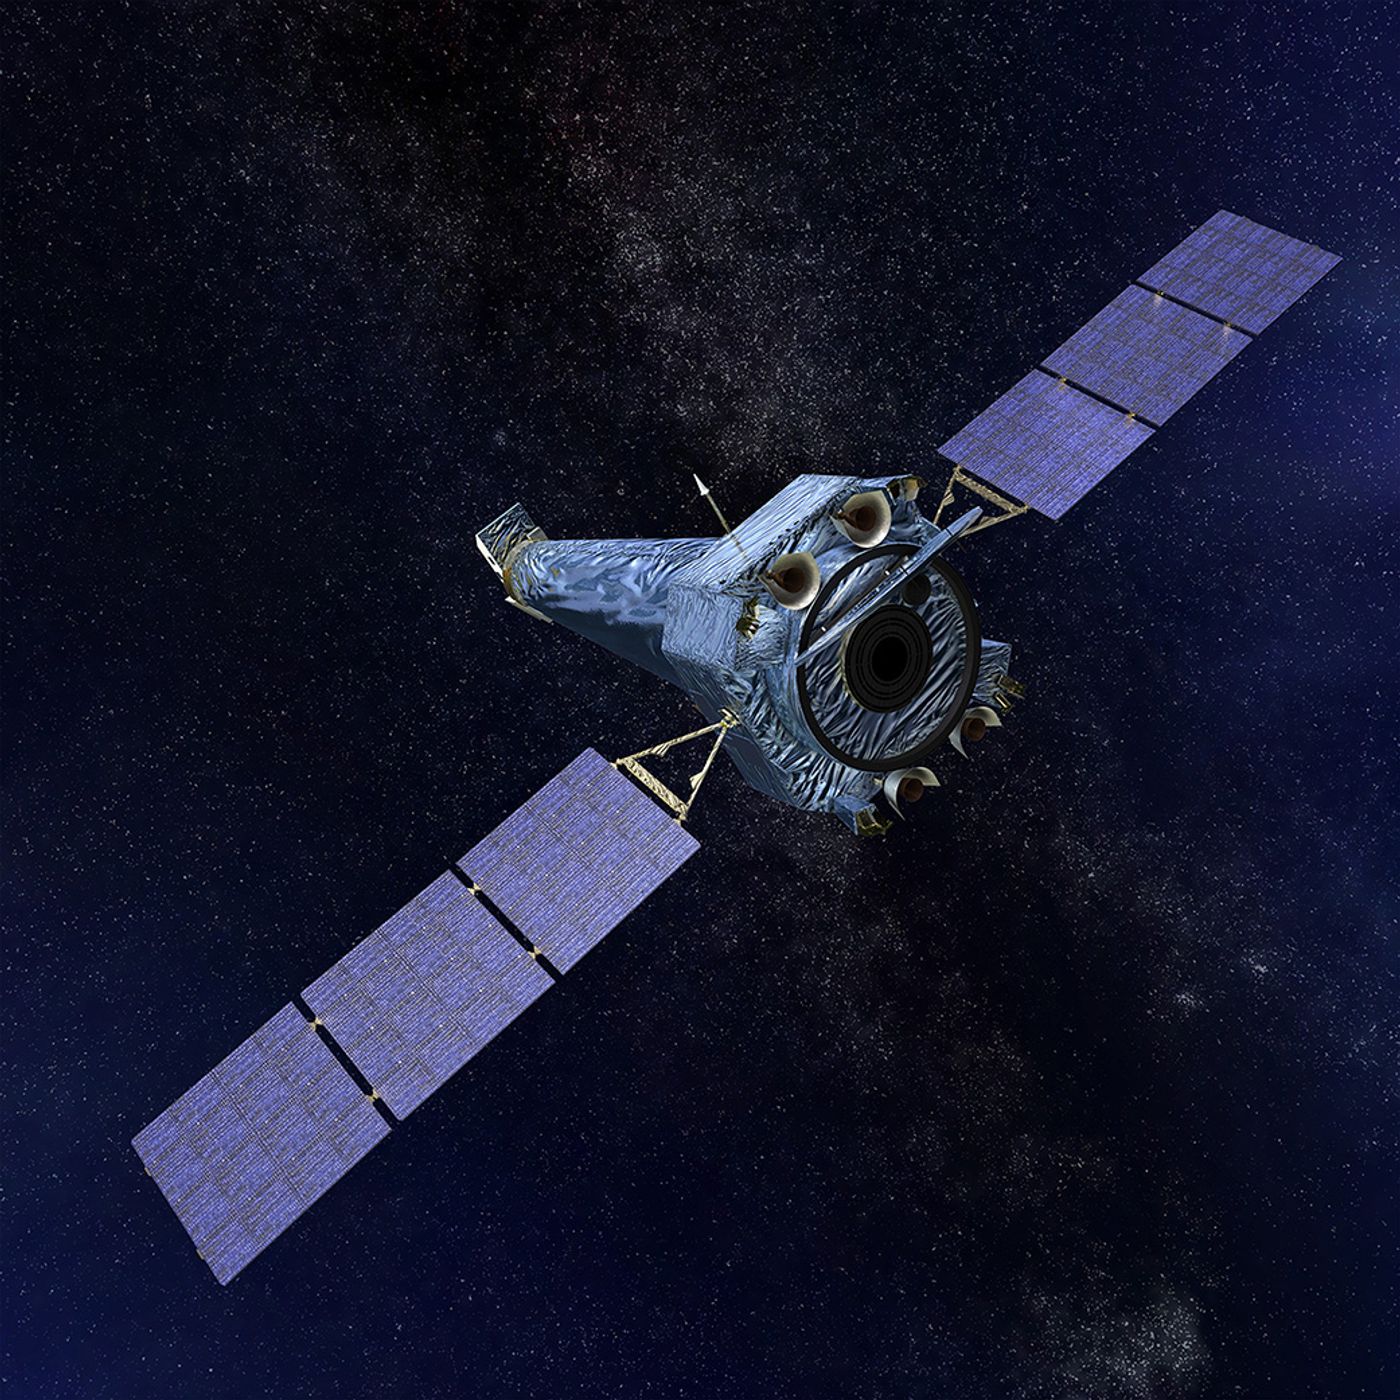 Following an unrectified anomaly, NASA's Chandra X-ray Observatory was forced into Safe Mode last week.